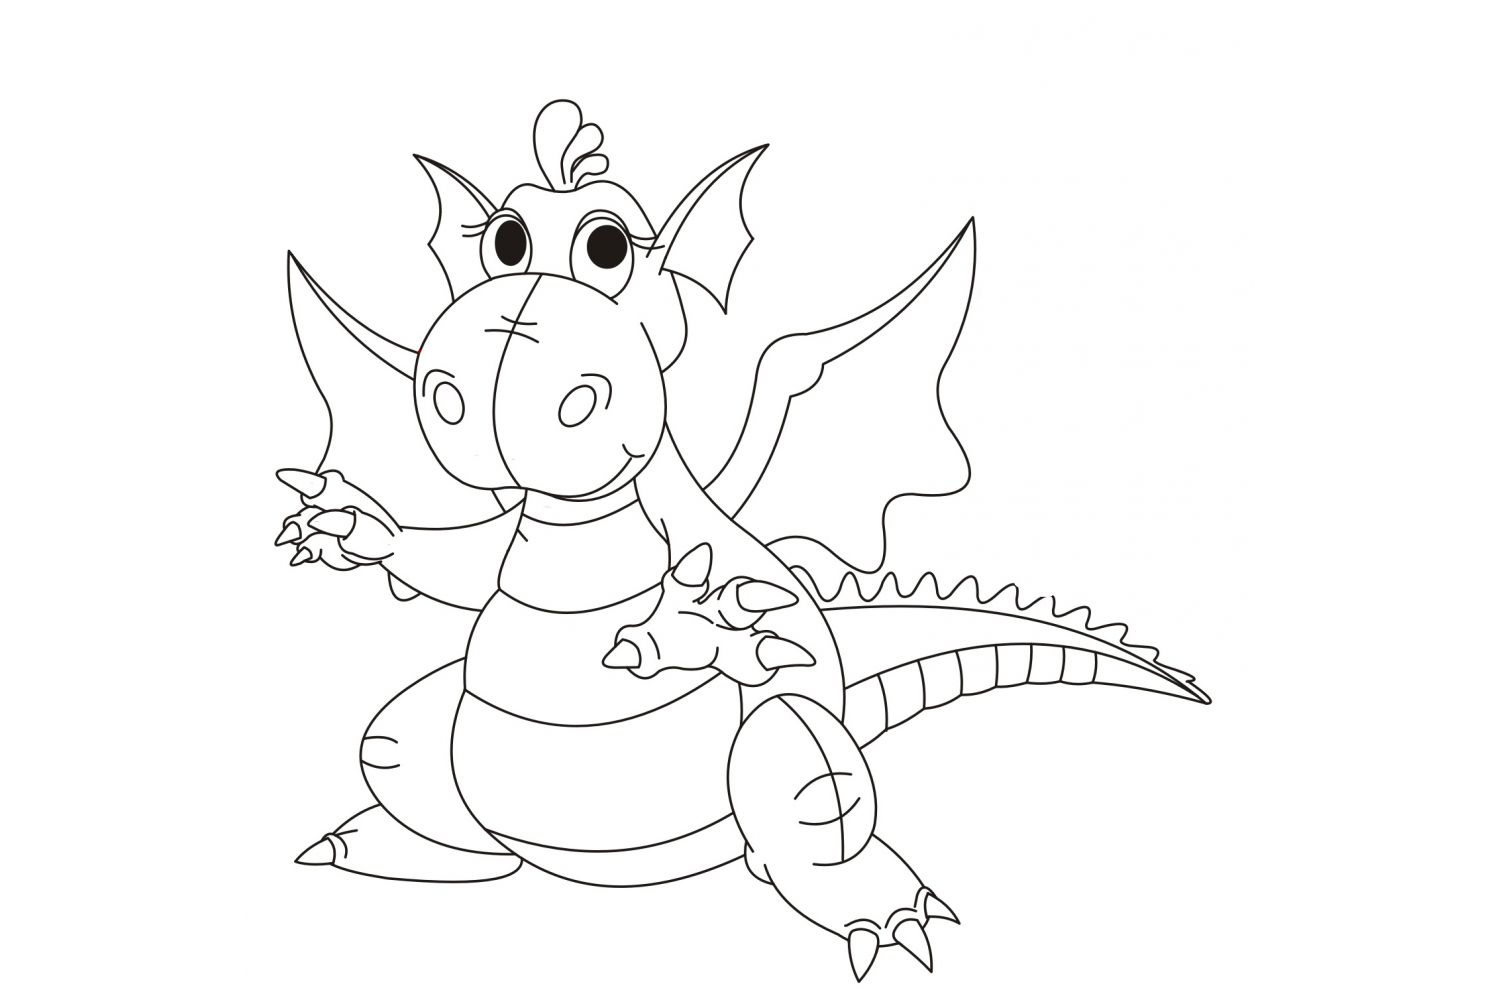 Dragons Coloring Pages. Print for free.